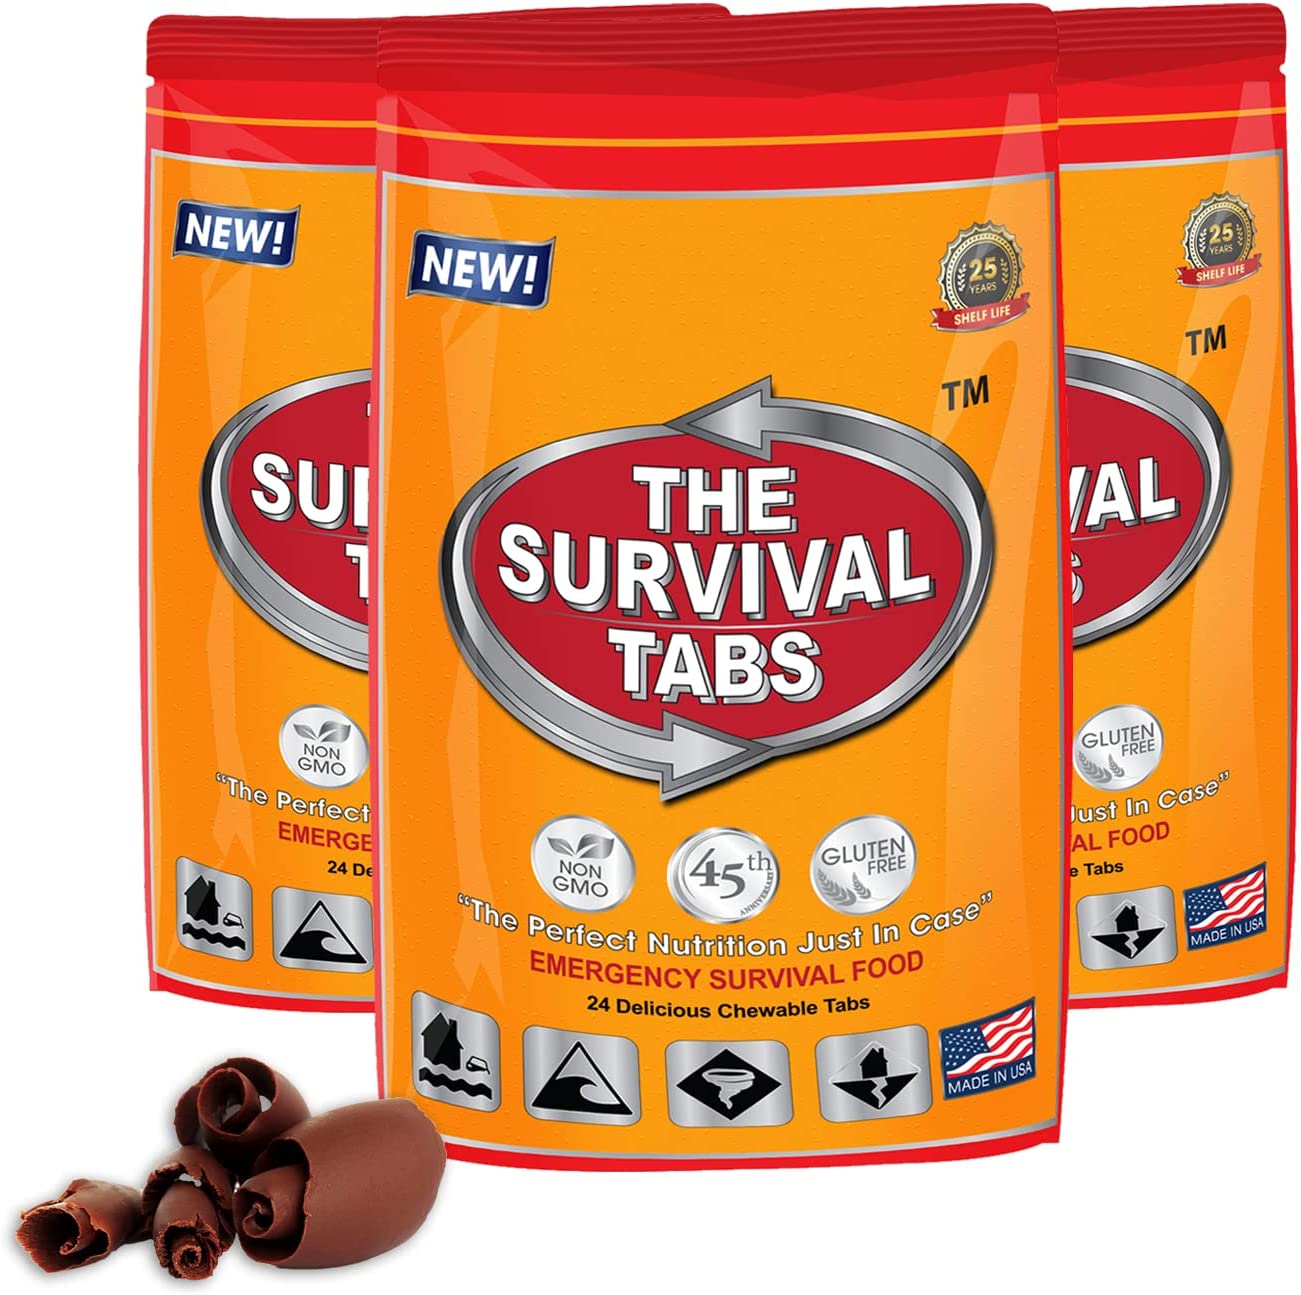 6 days Survival Food tablet none-GMO gluten-free 25 years shelf life 24 Tabs Chocolate x 3 pouches